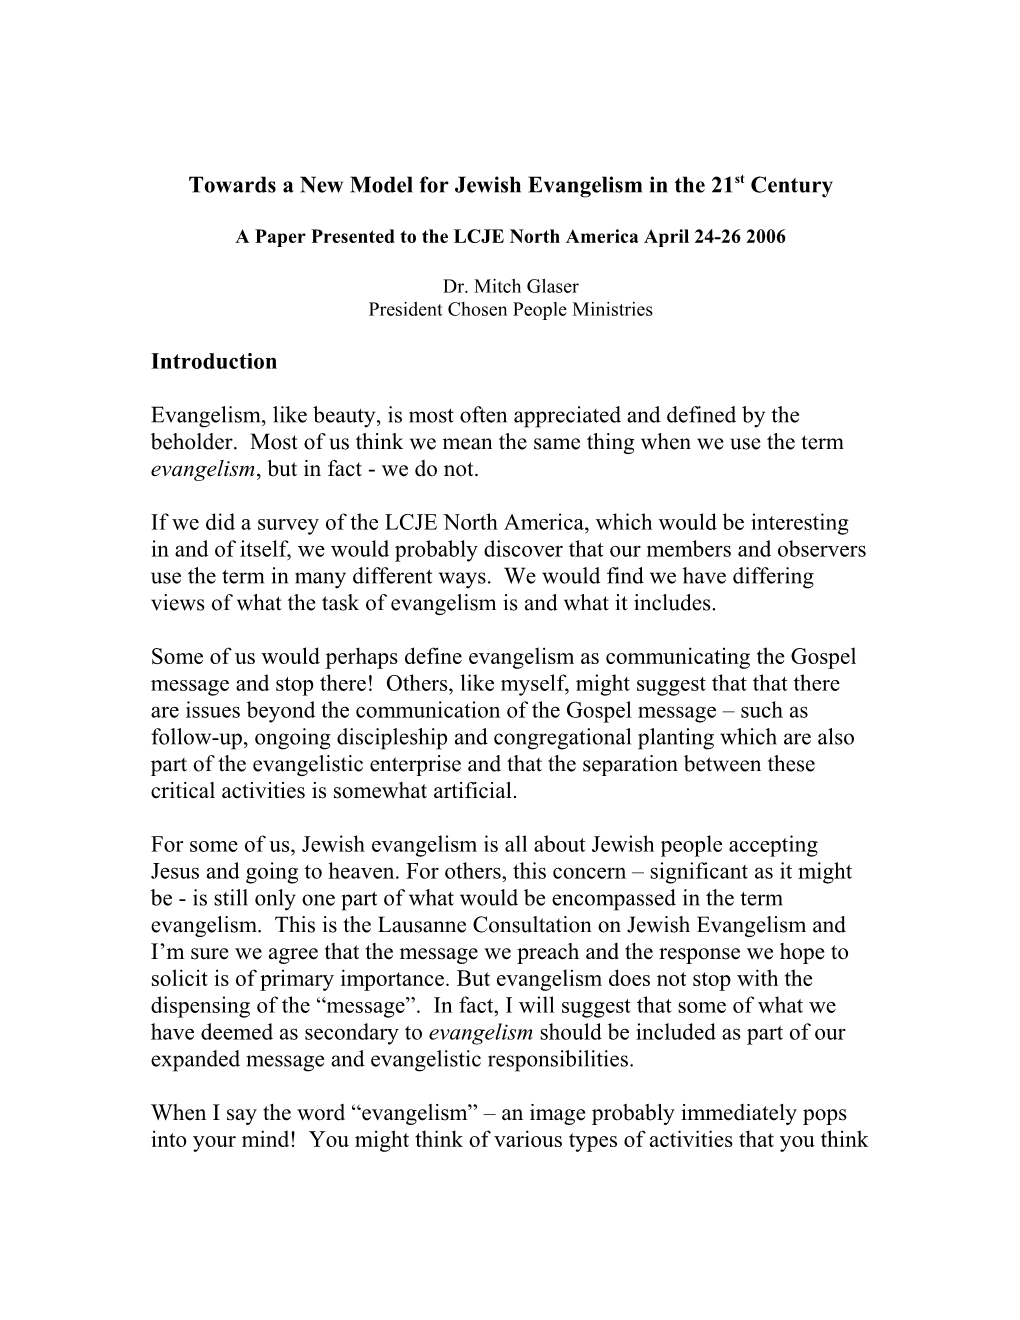 Towards a New Model for Jewish Evangelism in the 21St Century